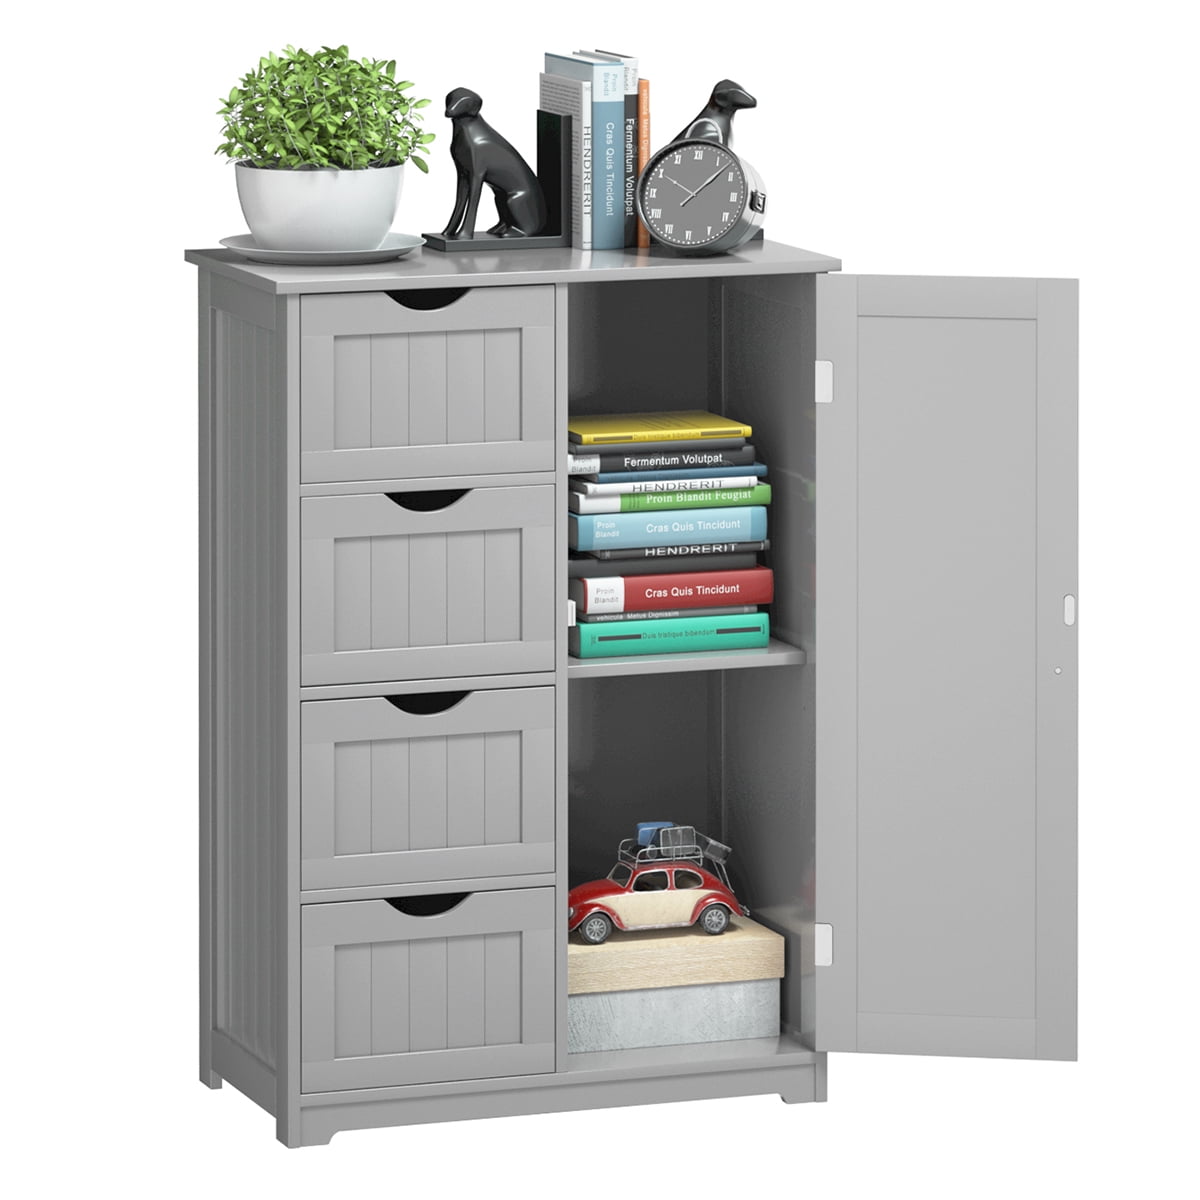 WestWood Free Standing Grey Wooden 4 Drawer 2 Shelves Bathroom Storage Cupboard Cabinet With one Door Organizer Unit FH-BS-02